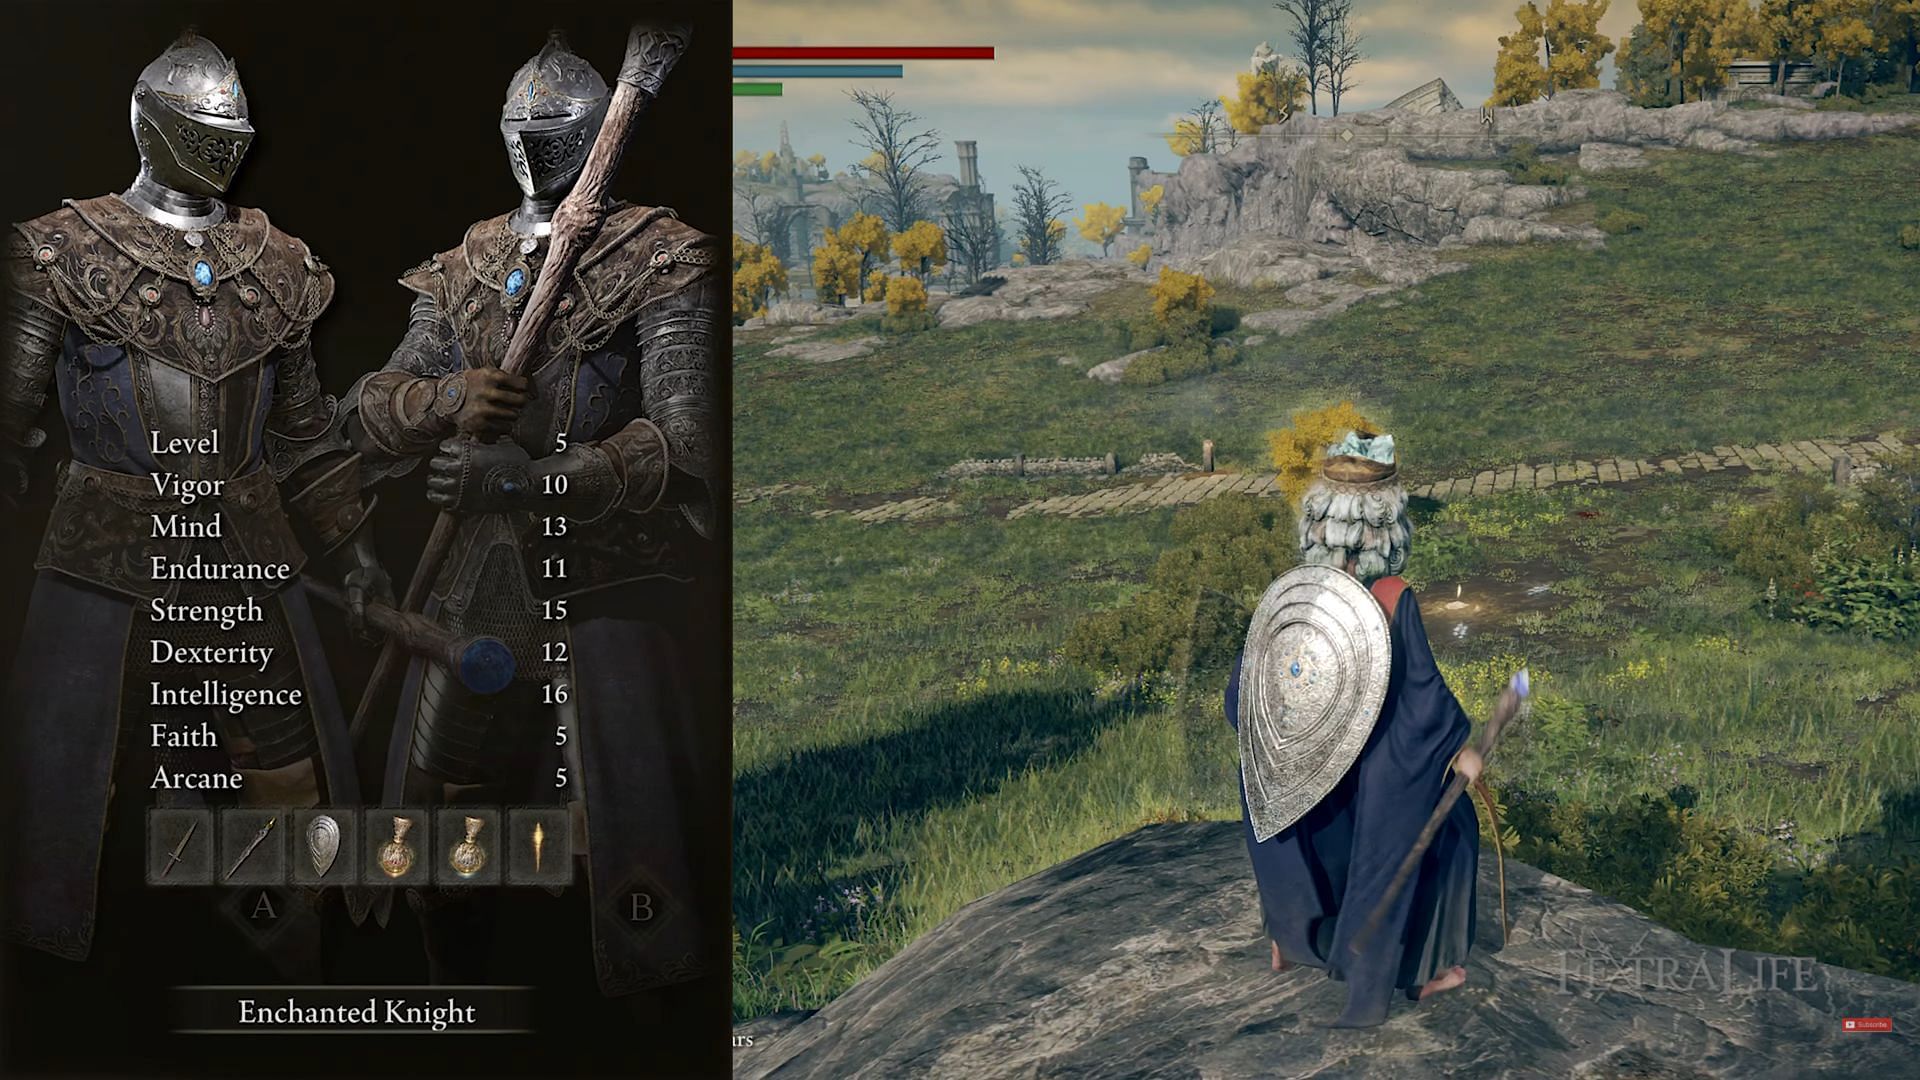 The Enchanted Knight is probably one of the most balanced classes as of now (Image via Fextralife)